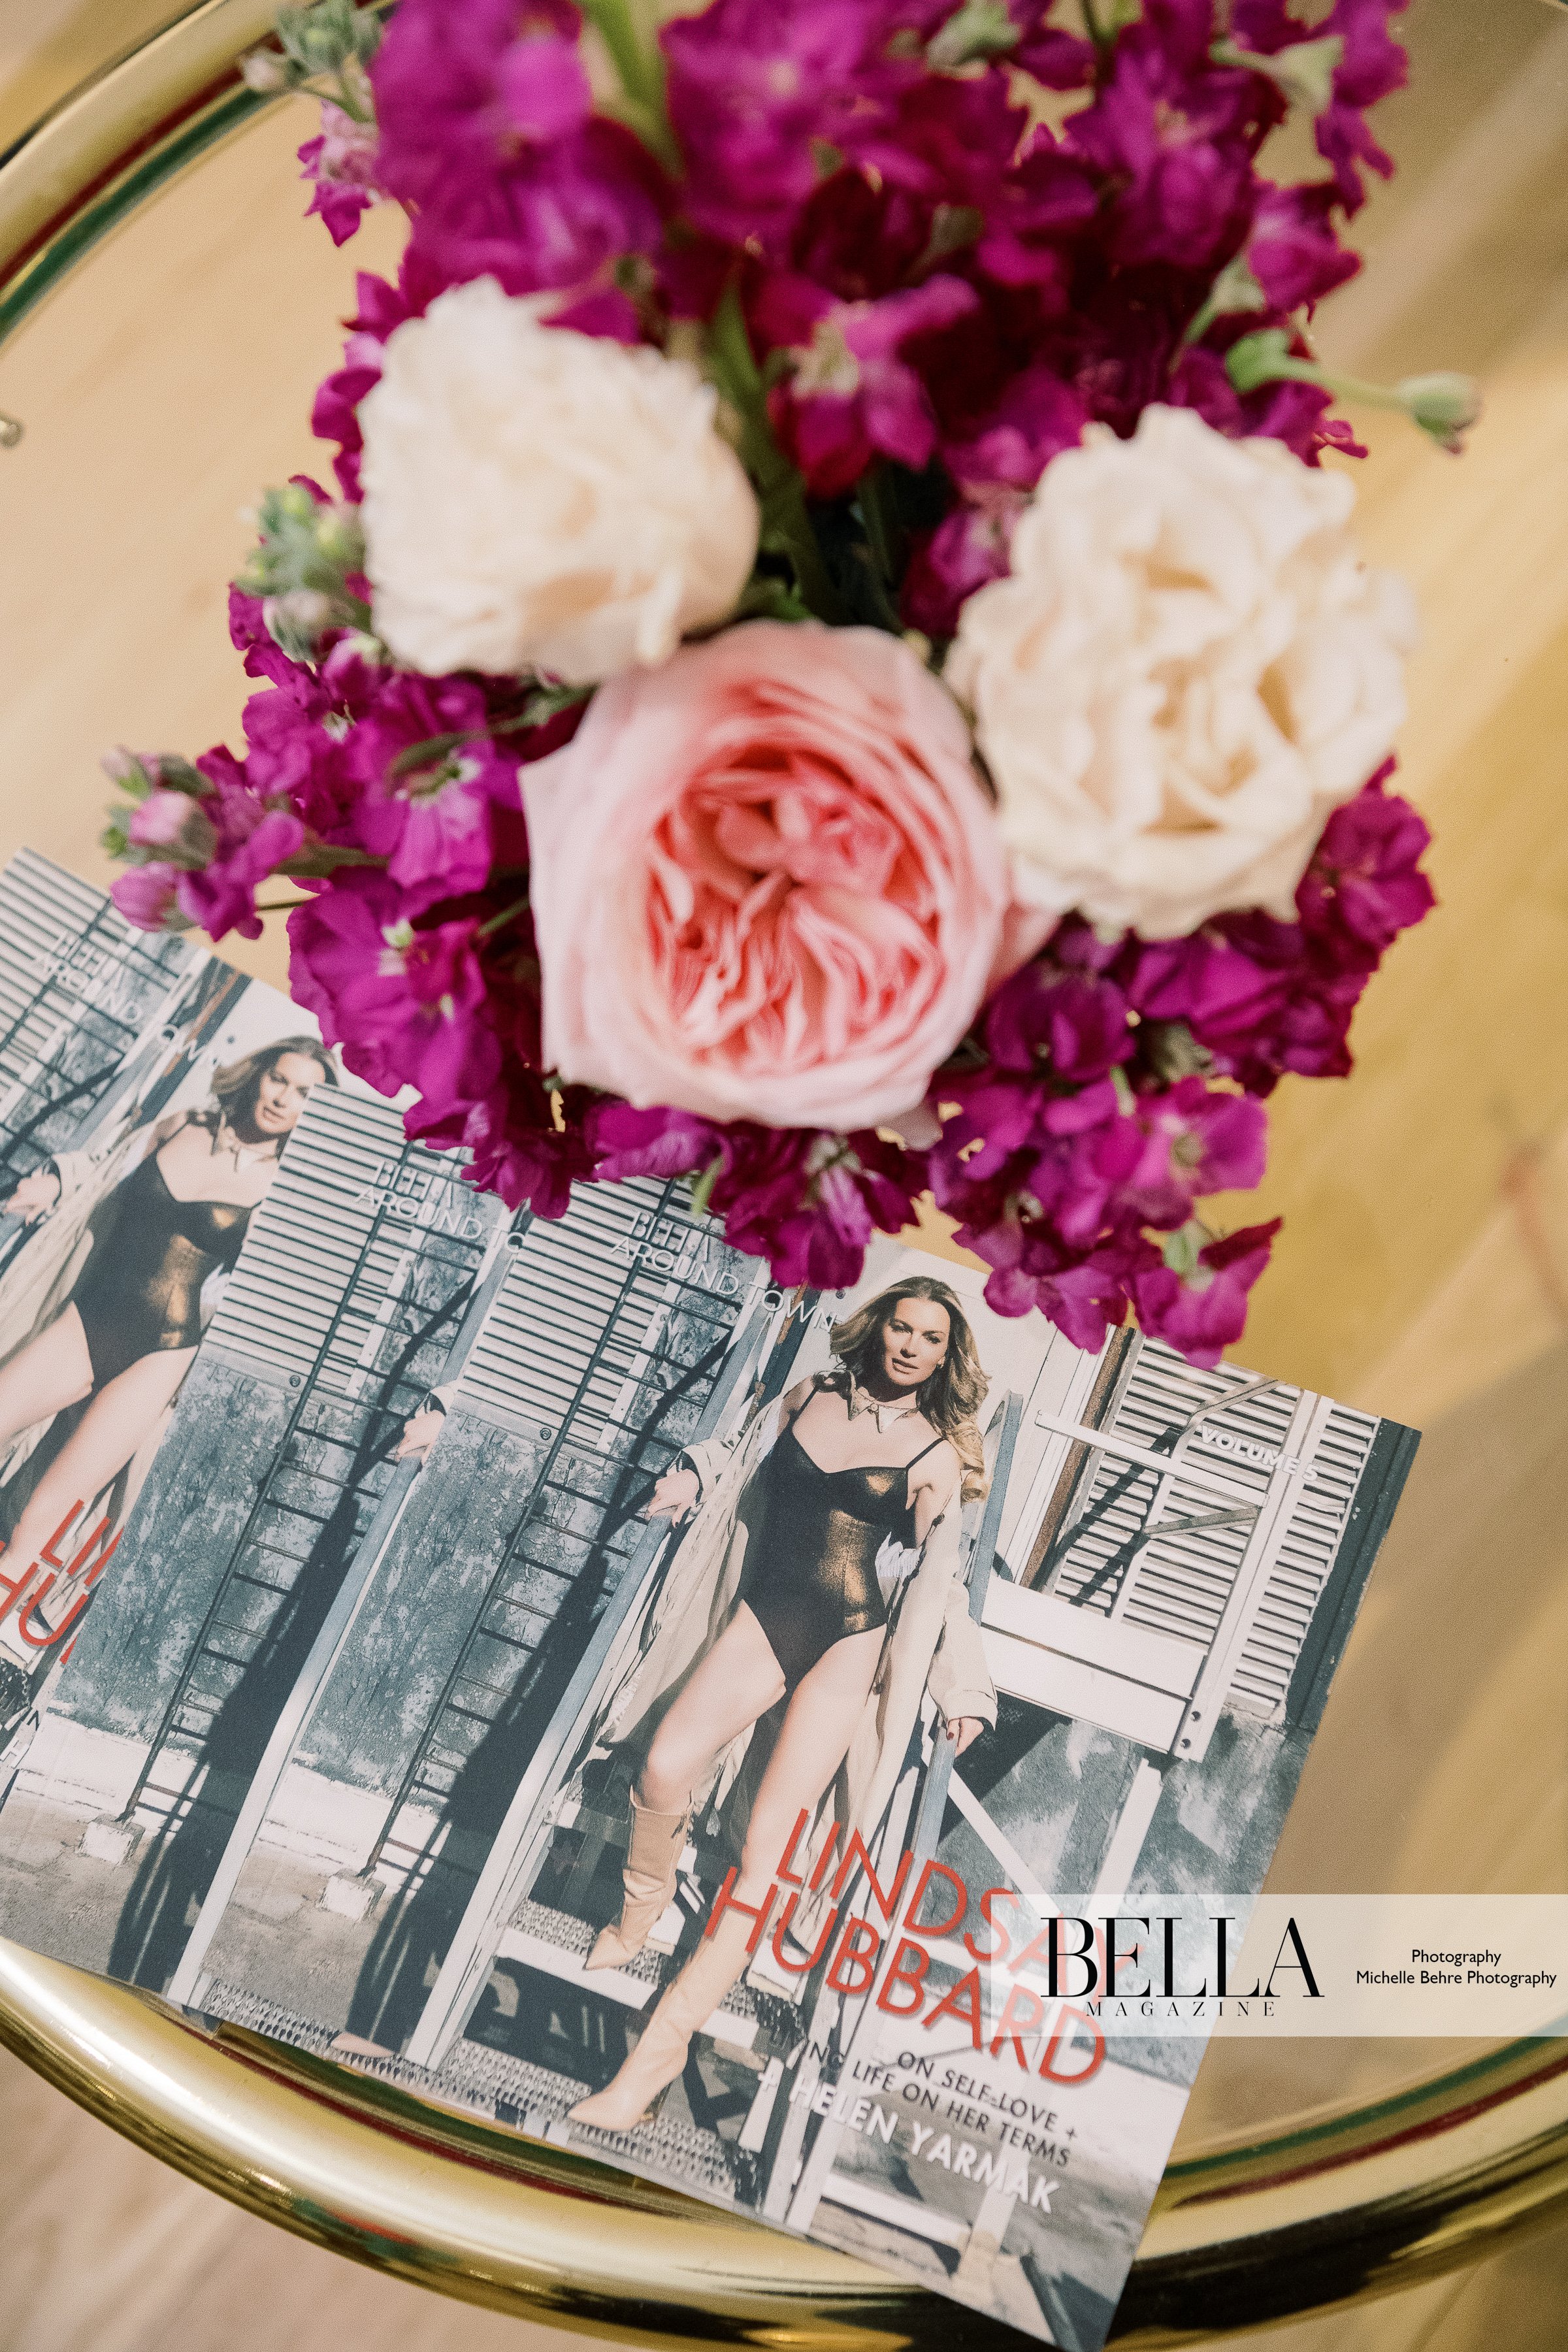 Michelle-Behre-Photography-Watermarked-2024-BELLA-MAGAZINE-BELLA-AT-Relationship-Issue-Cover-Party-Helen-Yarmak-11.jpg